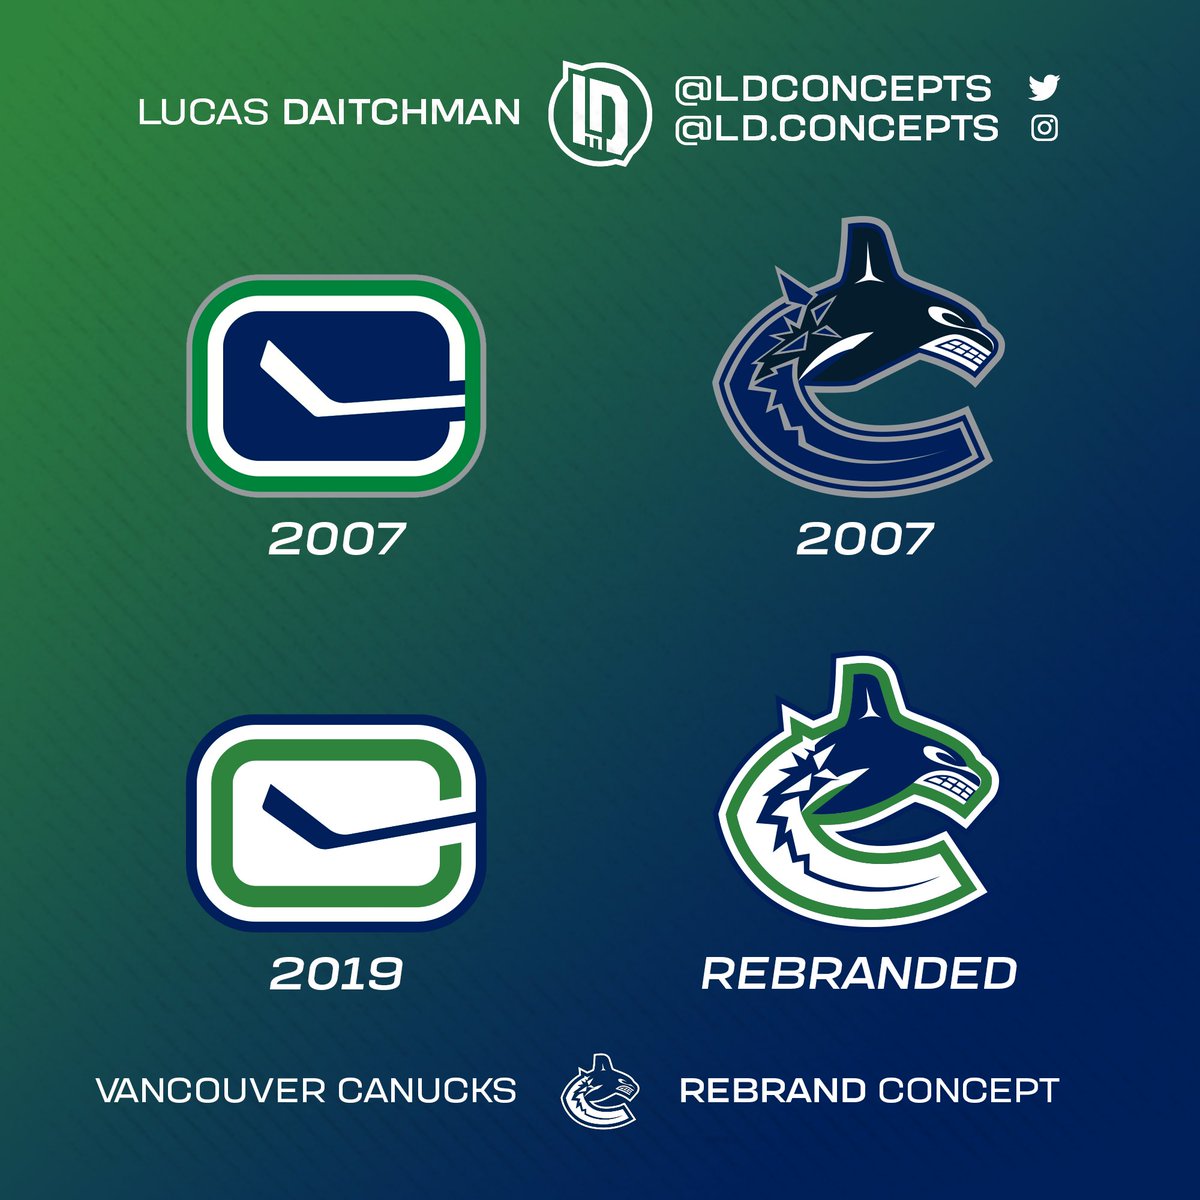 Lucas Daitchman on X: In my 4 #Canucks concepts, I promoted their